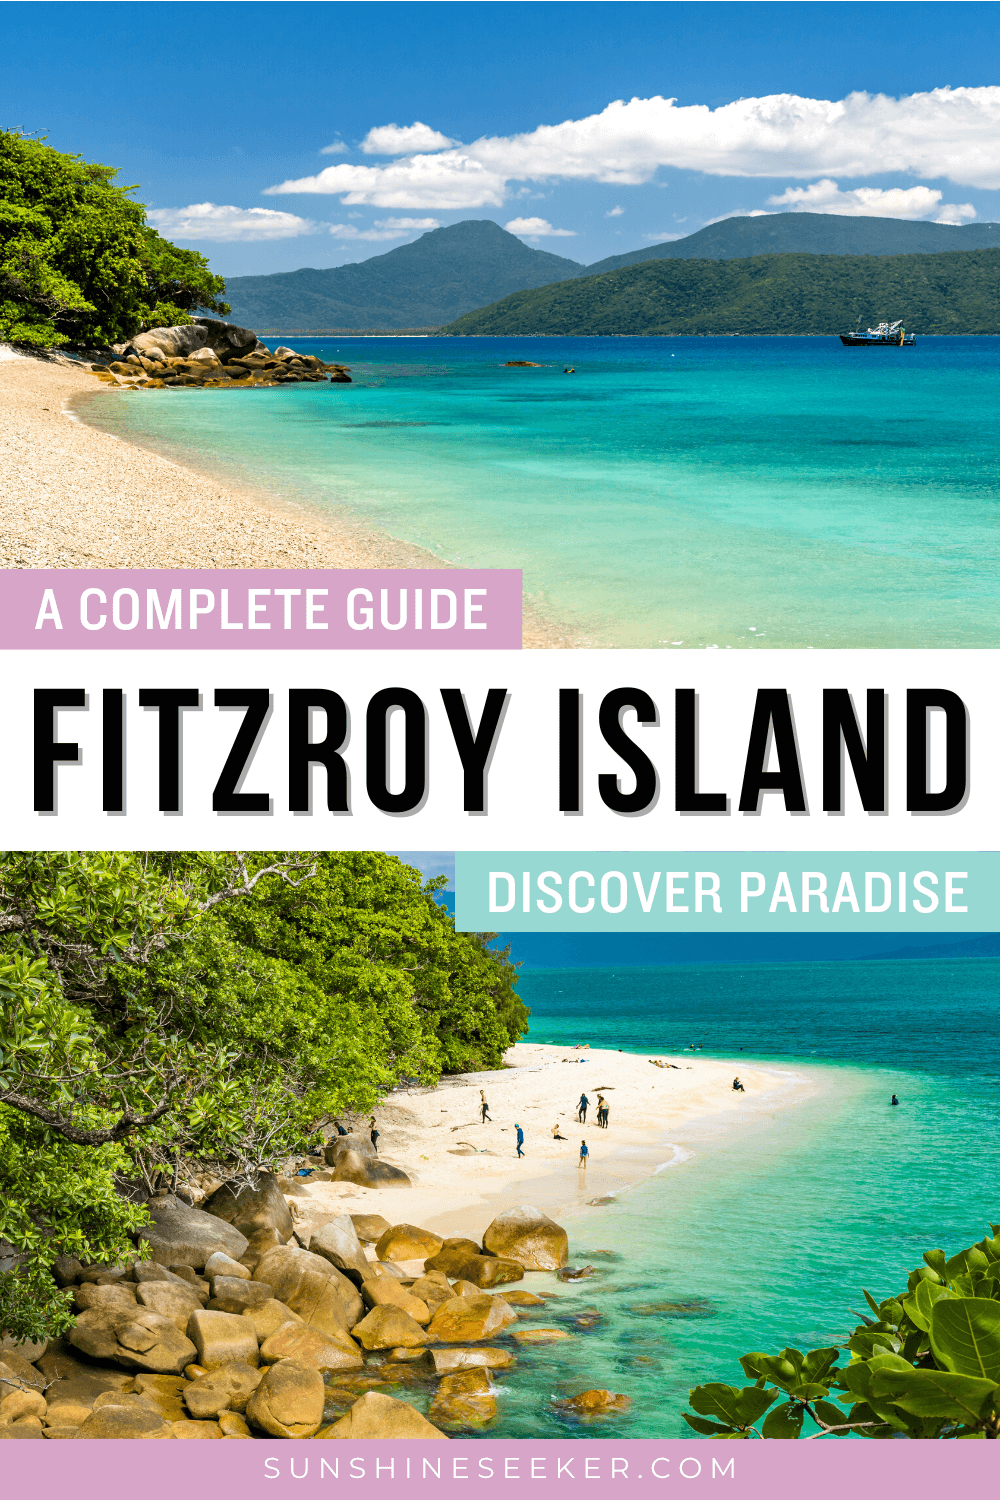 Discover the beautiful Fitzroy Island just outside Cairns in Australia. Set right in the middle of the Great Barrier Reef, Fitzroy Island is a paradise for swimming, snorkeling, diving and kayaking.